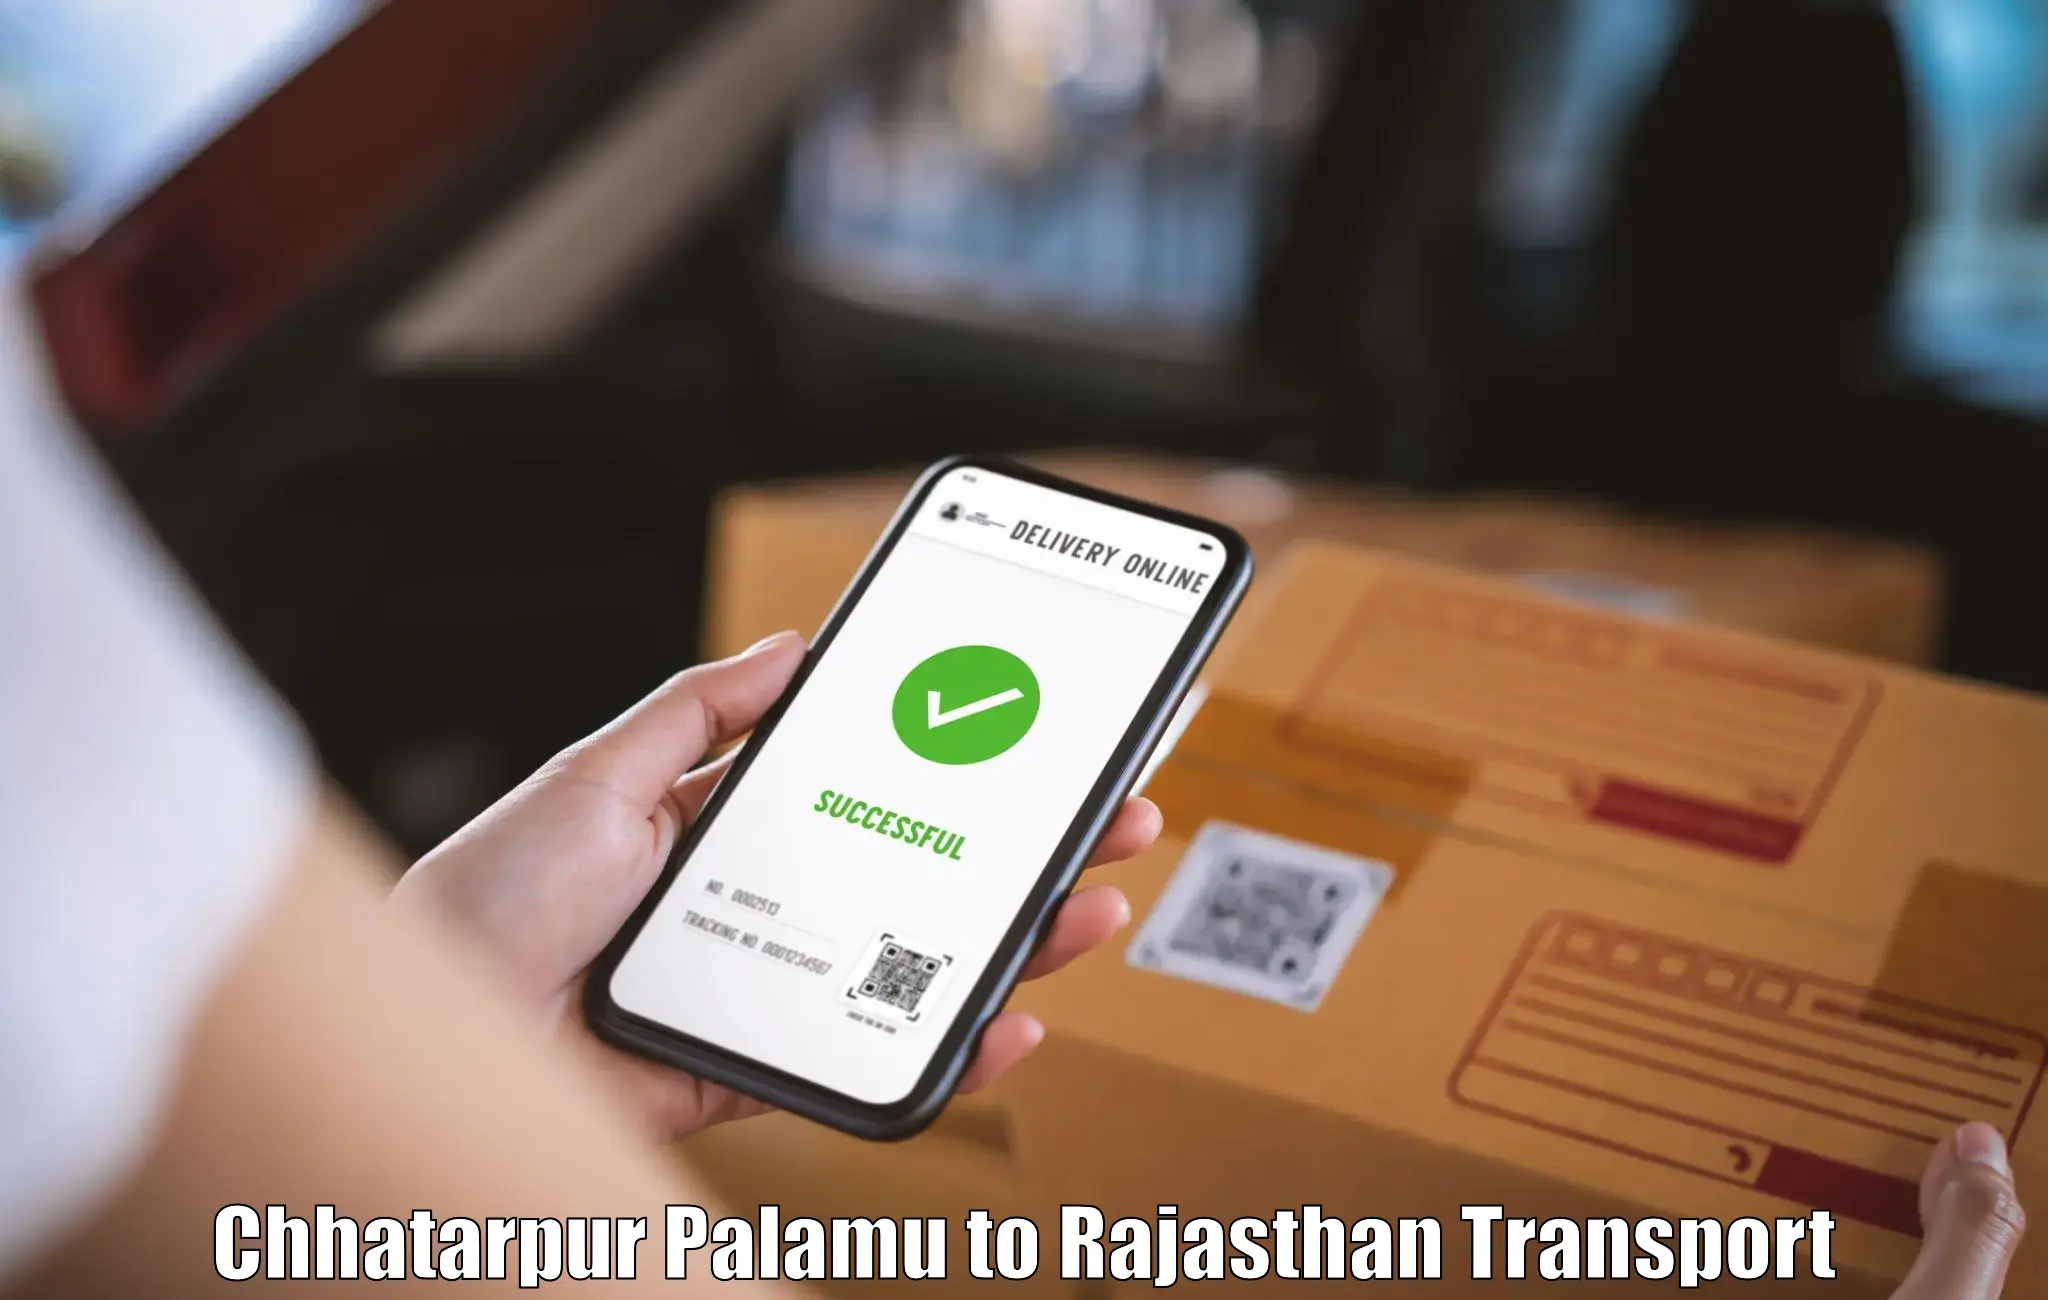 Package delivery services Chhatarpur Palamu to Lalsot